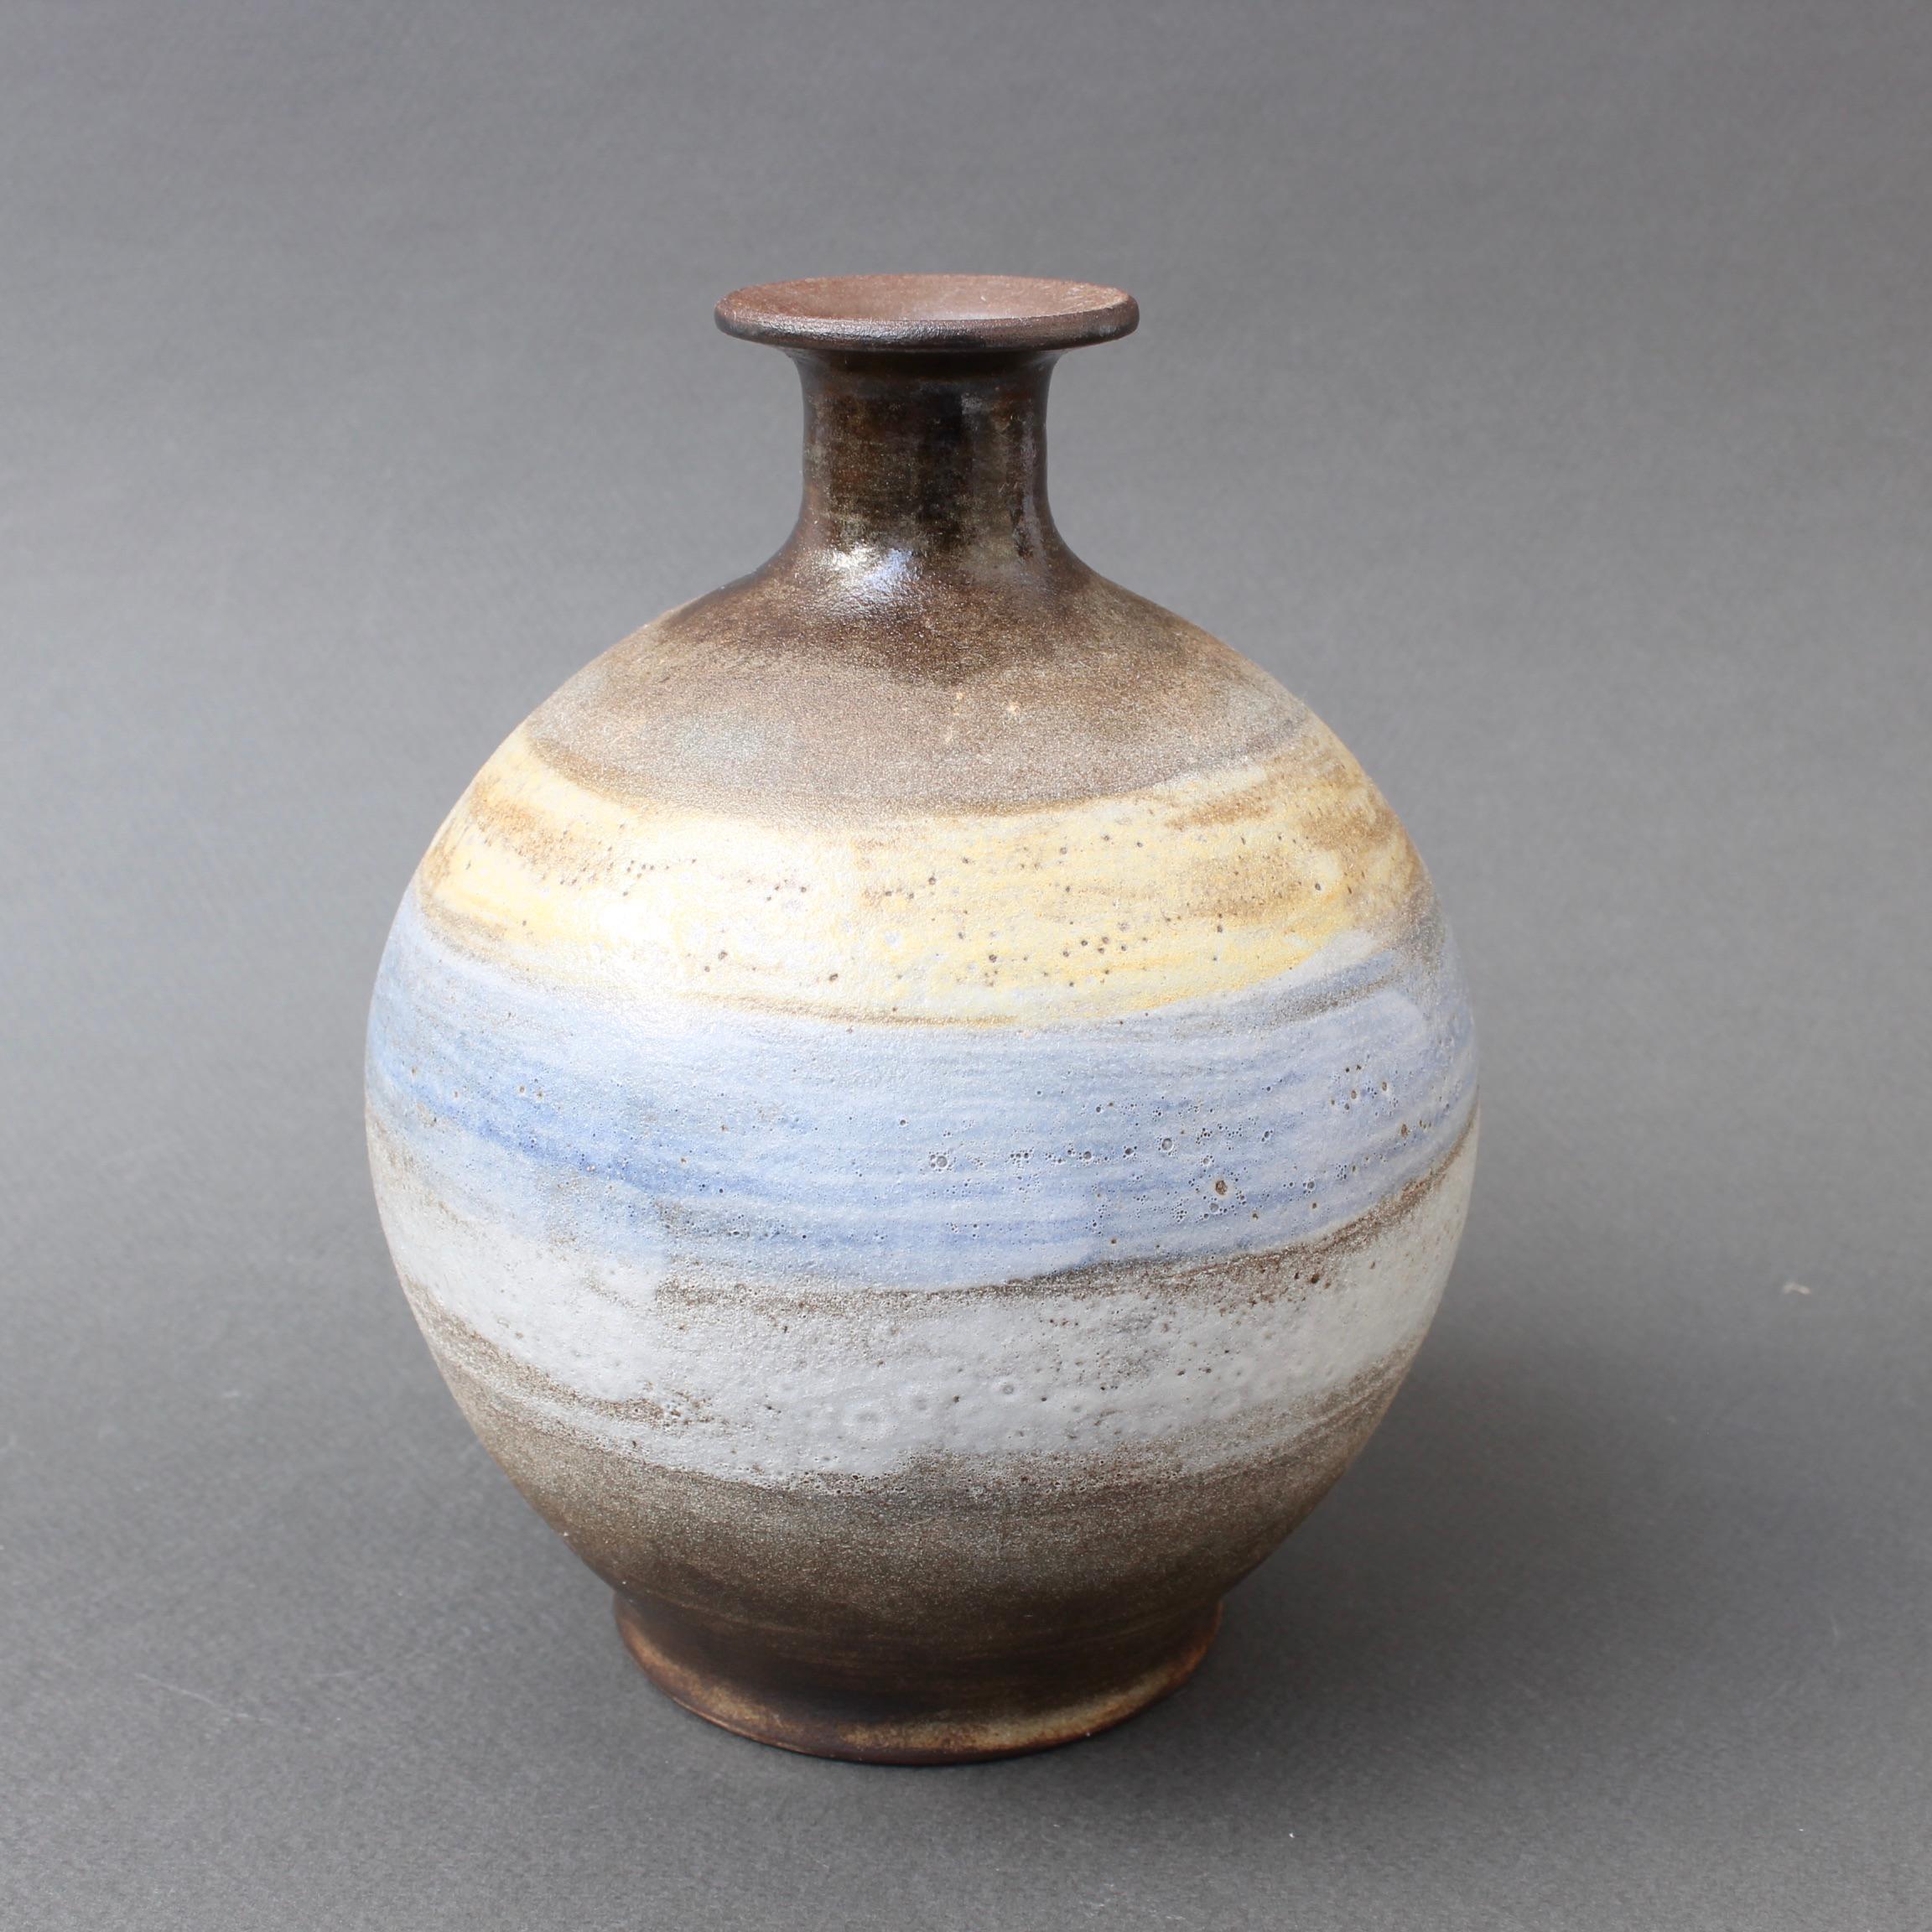 Ceramic decorative vase by Alexandre Kostanda, Vallauris, France, (circa 1960s). Kostanda's trademark natural clay and rustic style is enriched in this piece with ethereal painted rings like those that encircle planets in space. Their subtle hues